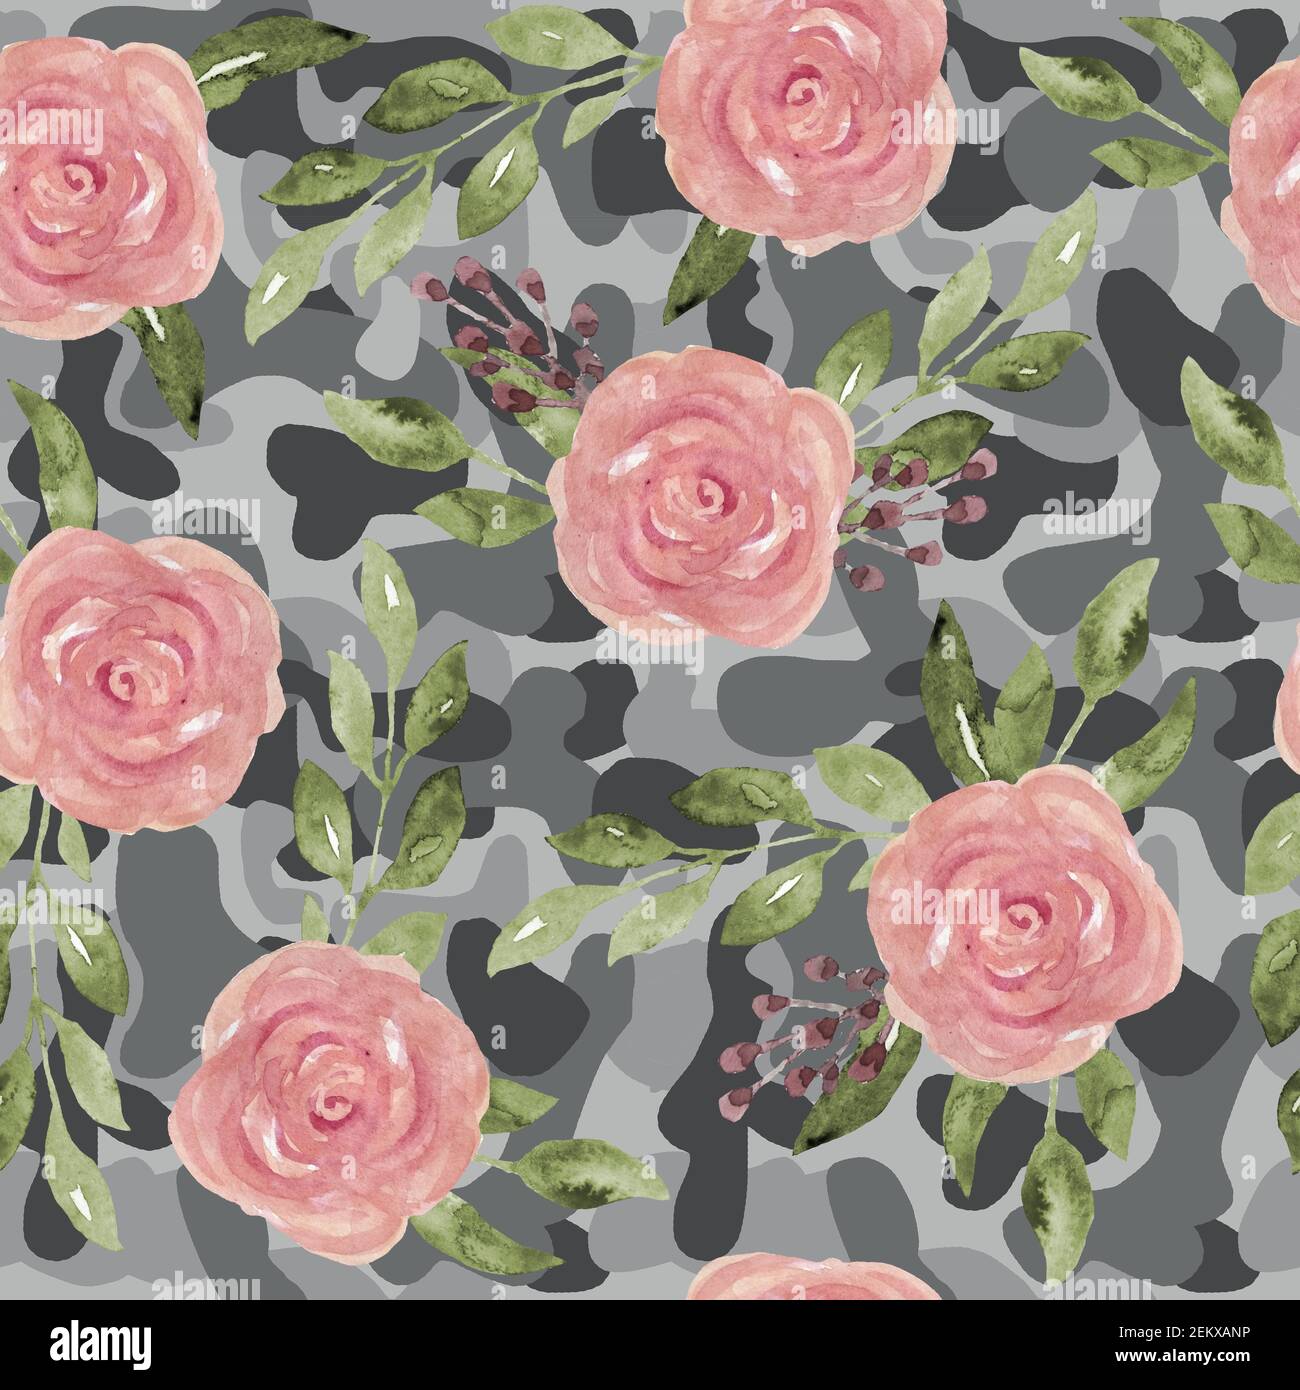 Floral camo camouflage seamless pattern with pink roses flowers